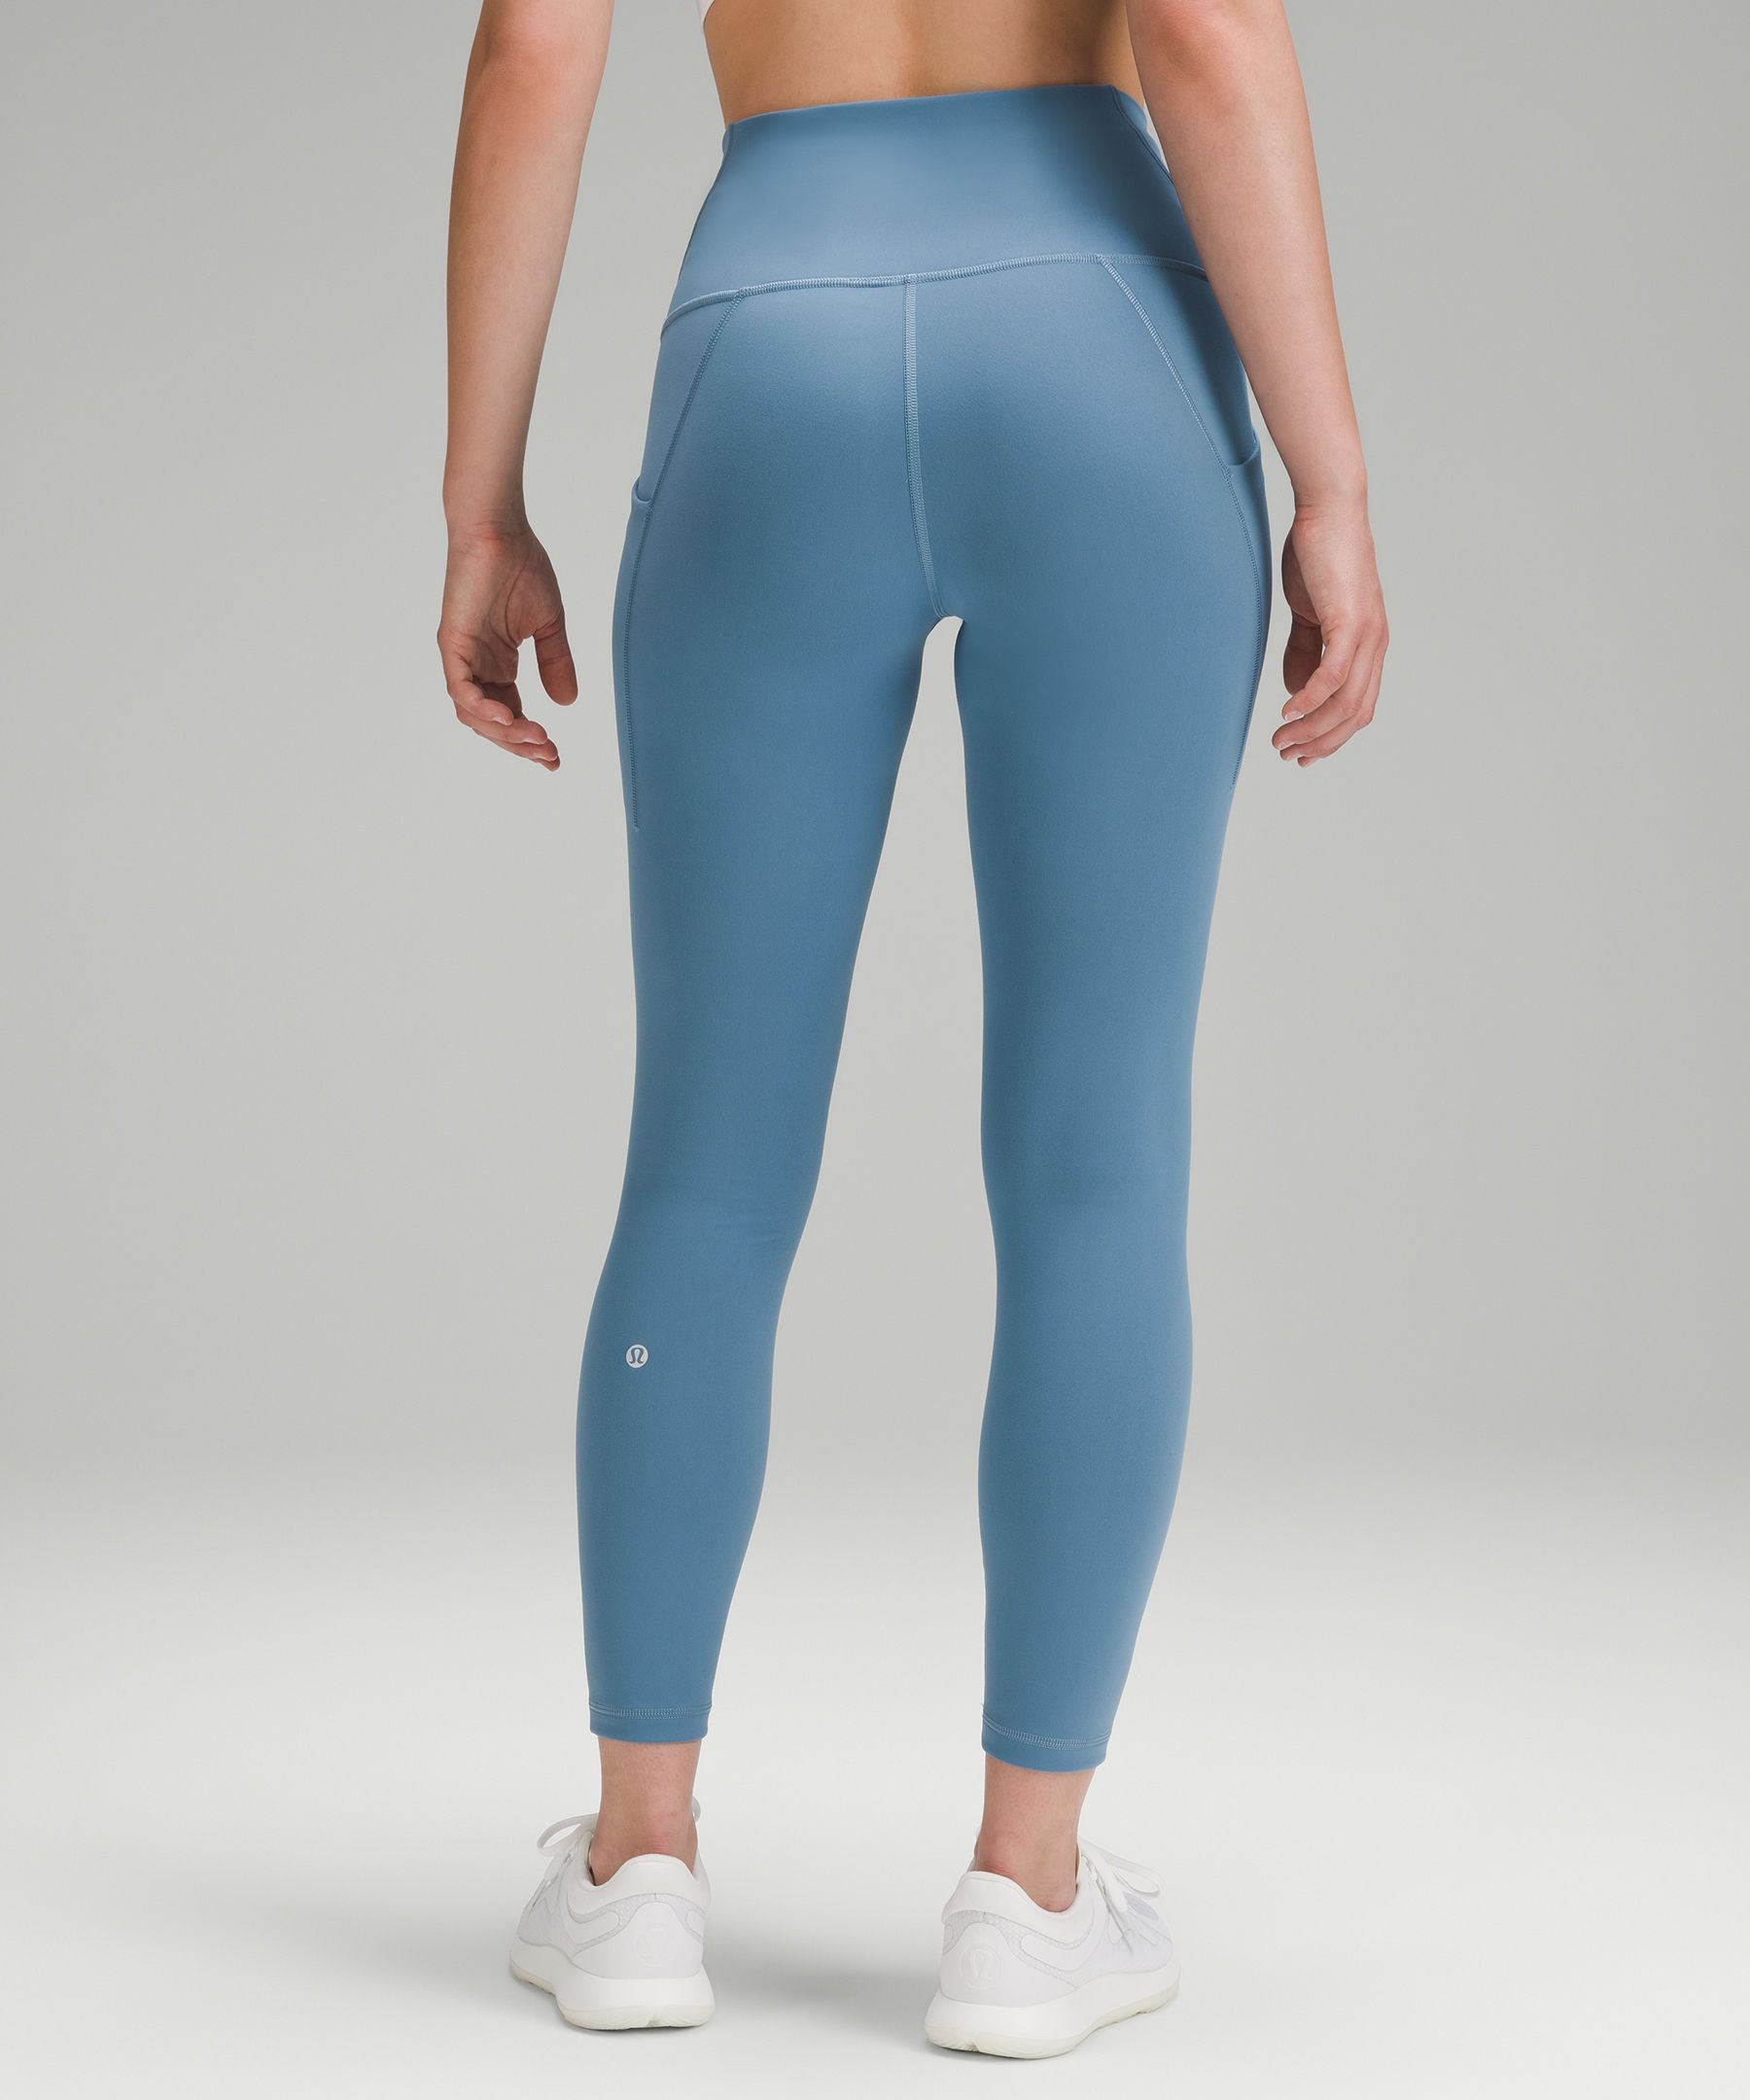 Lululemon Wunder Train High-Rise Tight with Pockets 25". 3